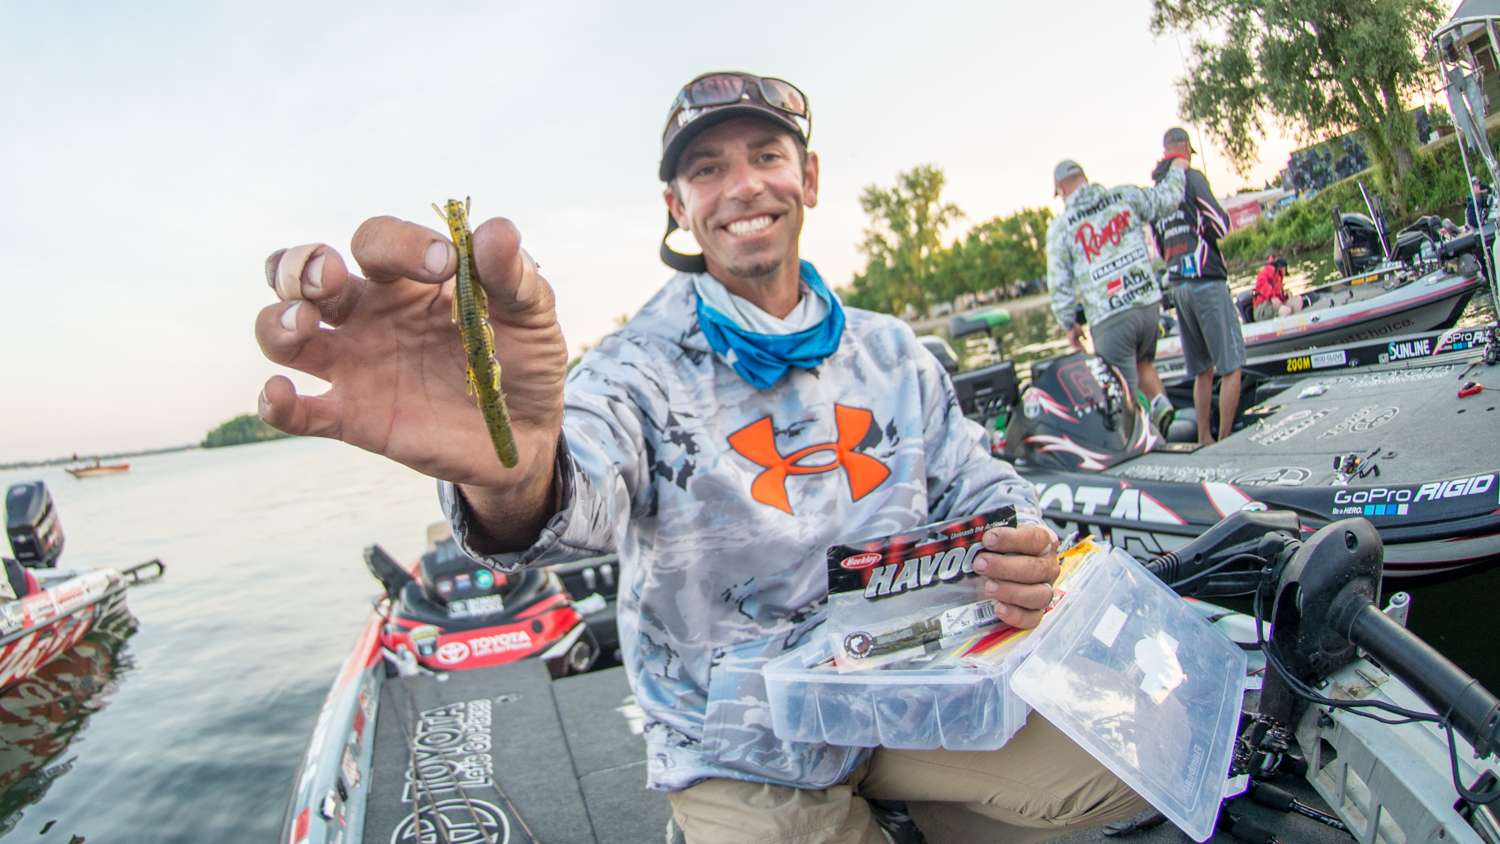 <b>11. Mike Iaconelli, 67-8</b><br> Mike Iaconelli relied on a selection of self-designed Berkley Havoc soft plastics. He alternated between a Texas-rigged Devil Spear and Back Slide, depending on the wind-driven bite conditions.  <p> âI fished the bulkier Devil Spear in the wind but they wouldnât touch it in calm conditions,â he said. The changeup from a reaction to finesse bite influenced the weight and profile of the lure. Casting targets were sandy spots and openings in the grass with evidence of spawning activity. 